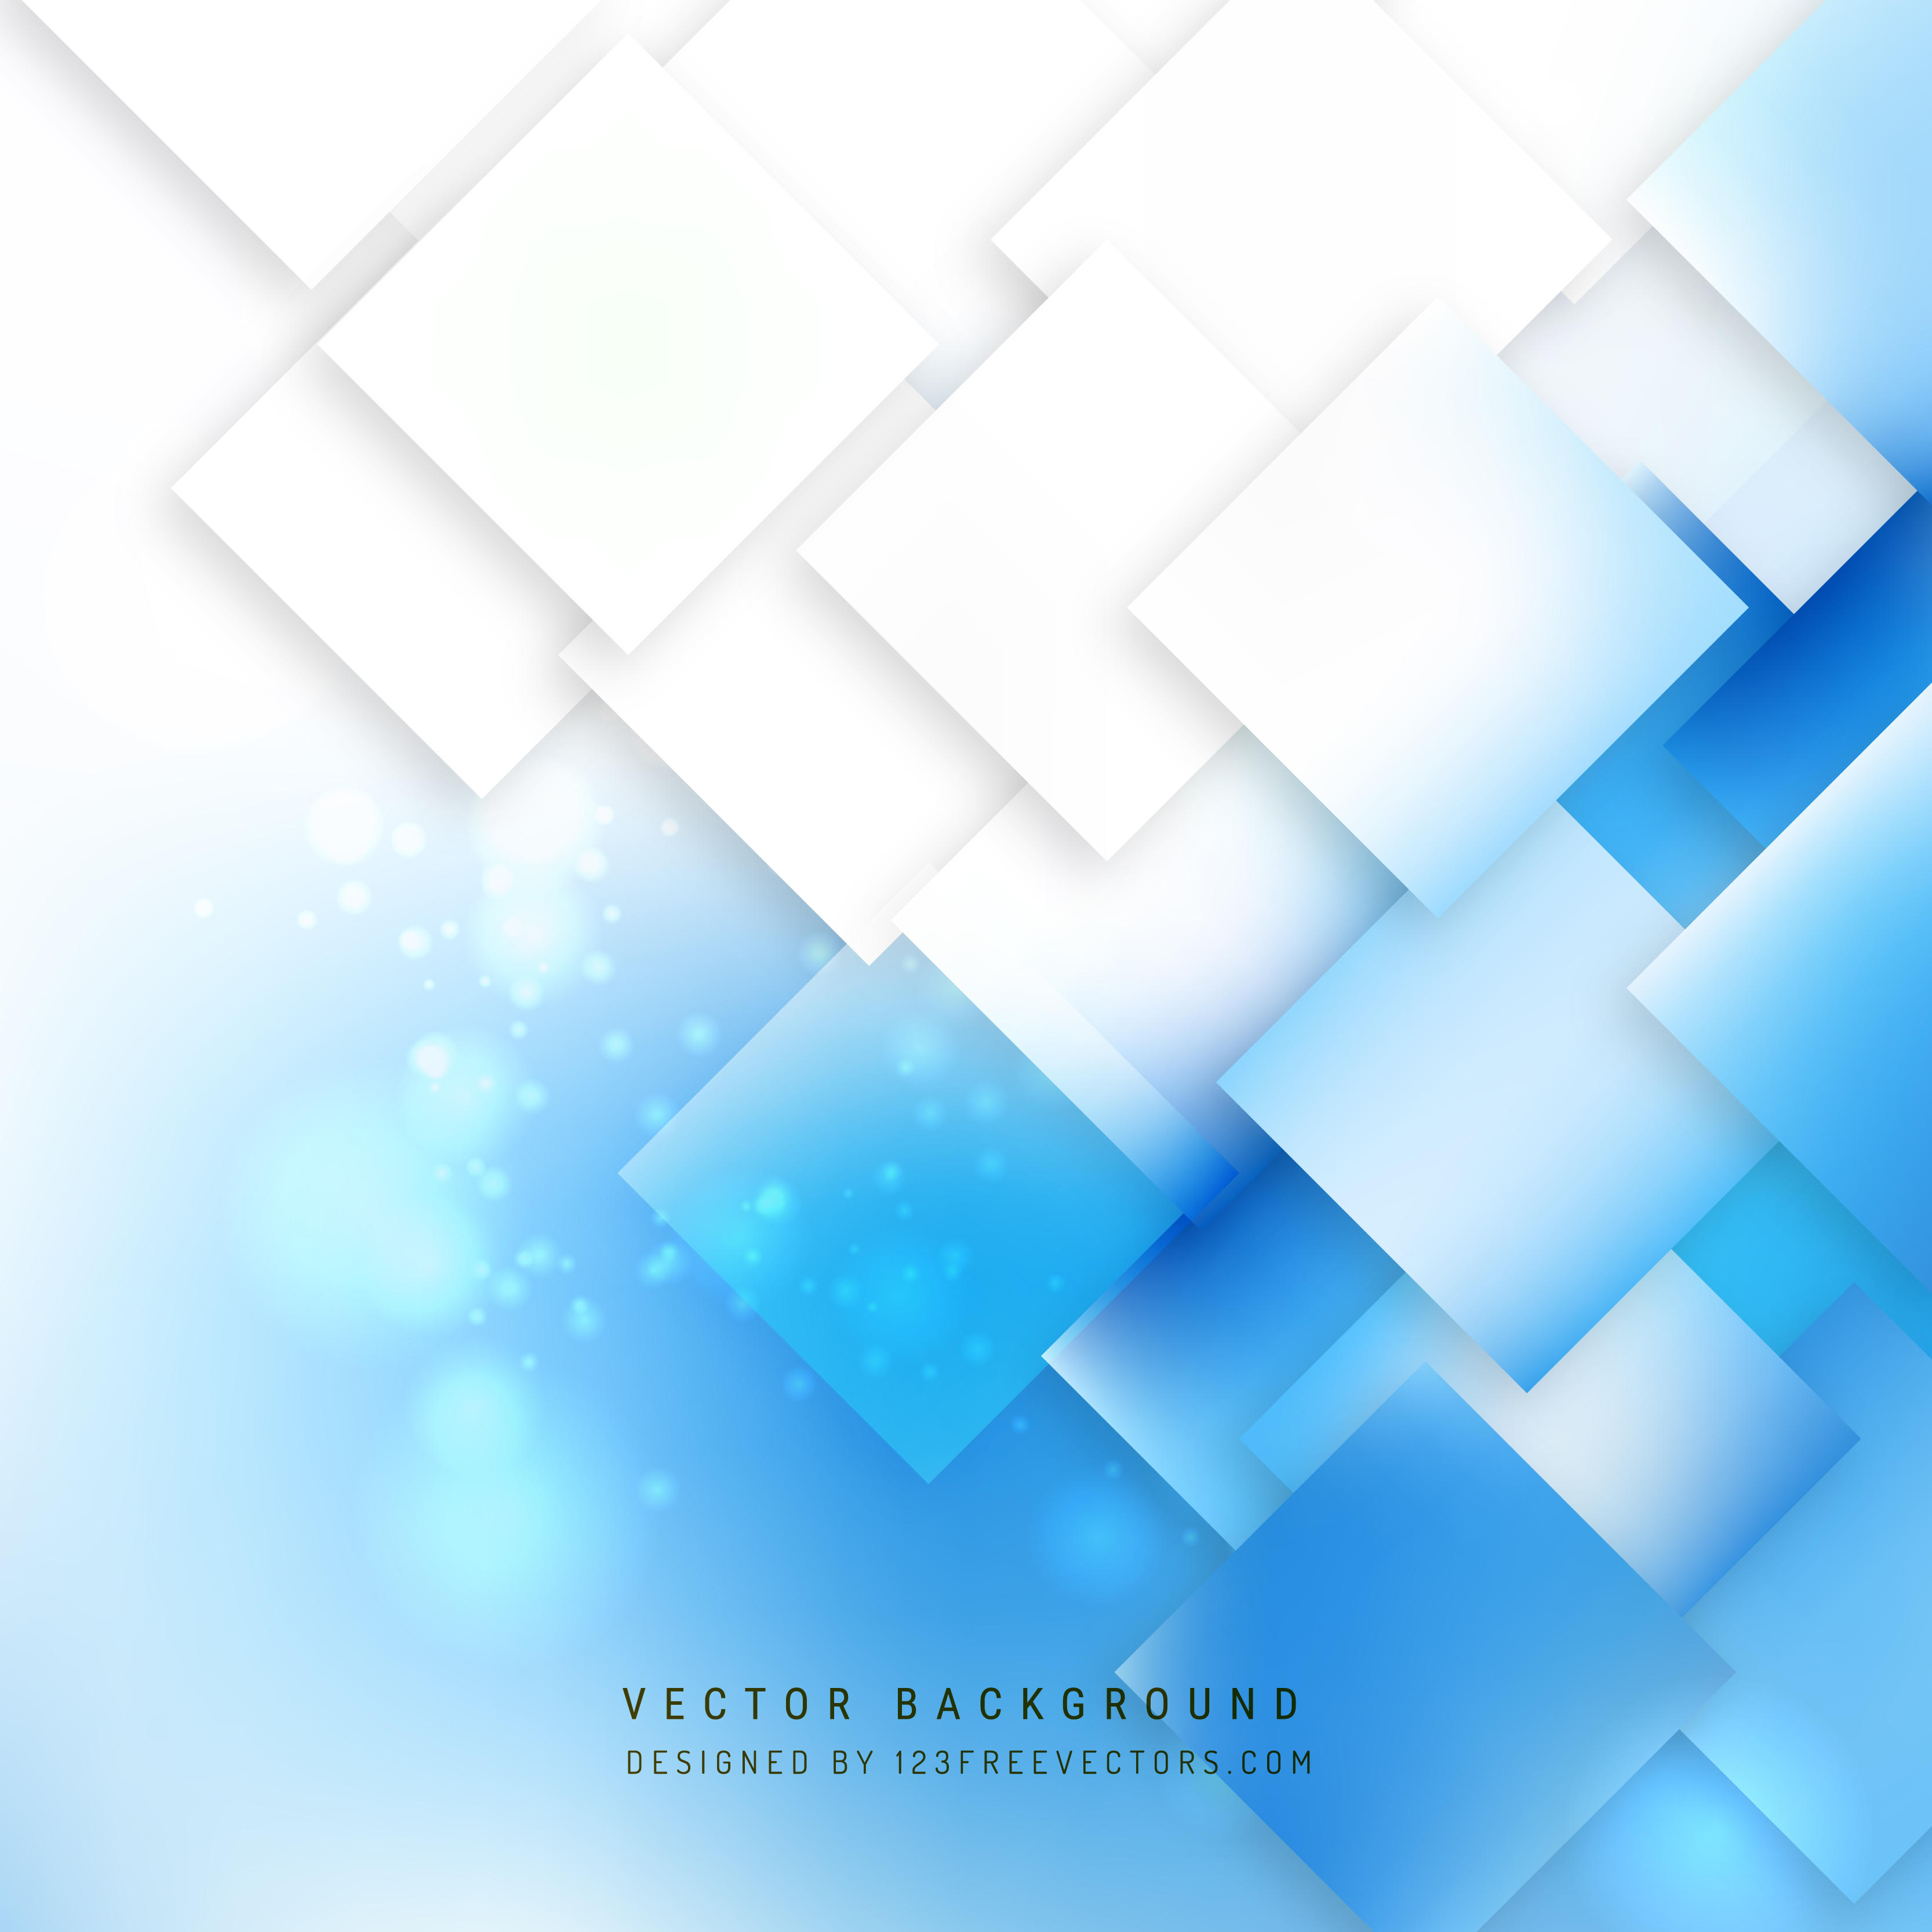 Abstract Blue White Geometric Square Background | 123Freevectors